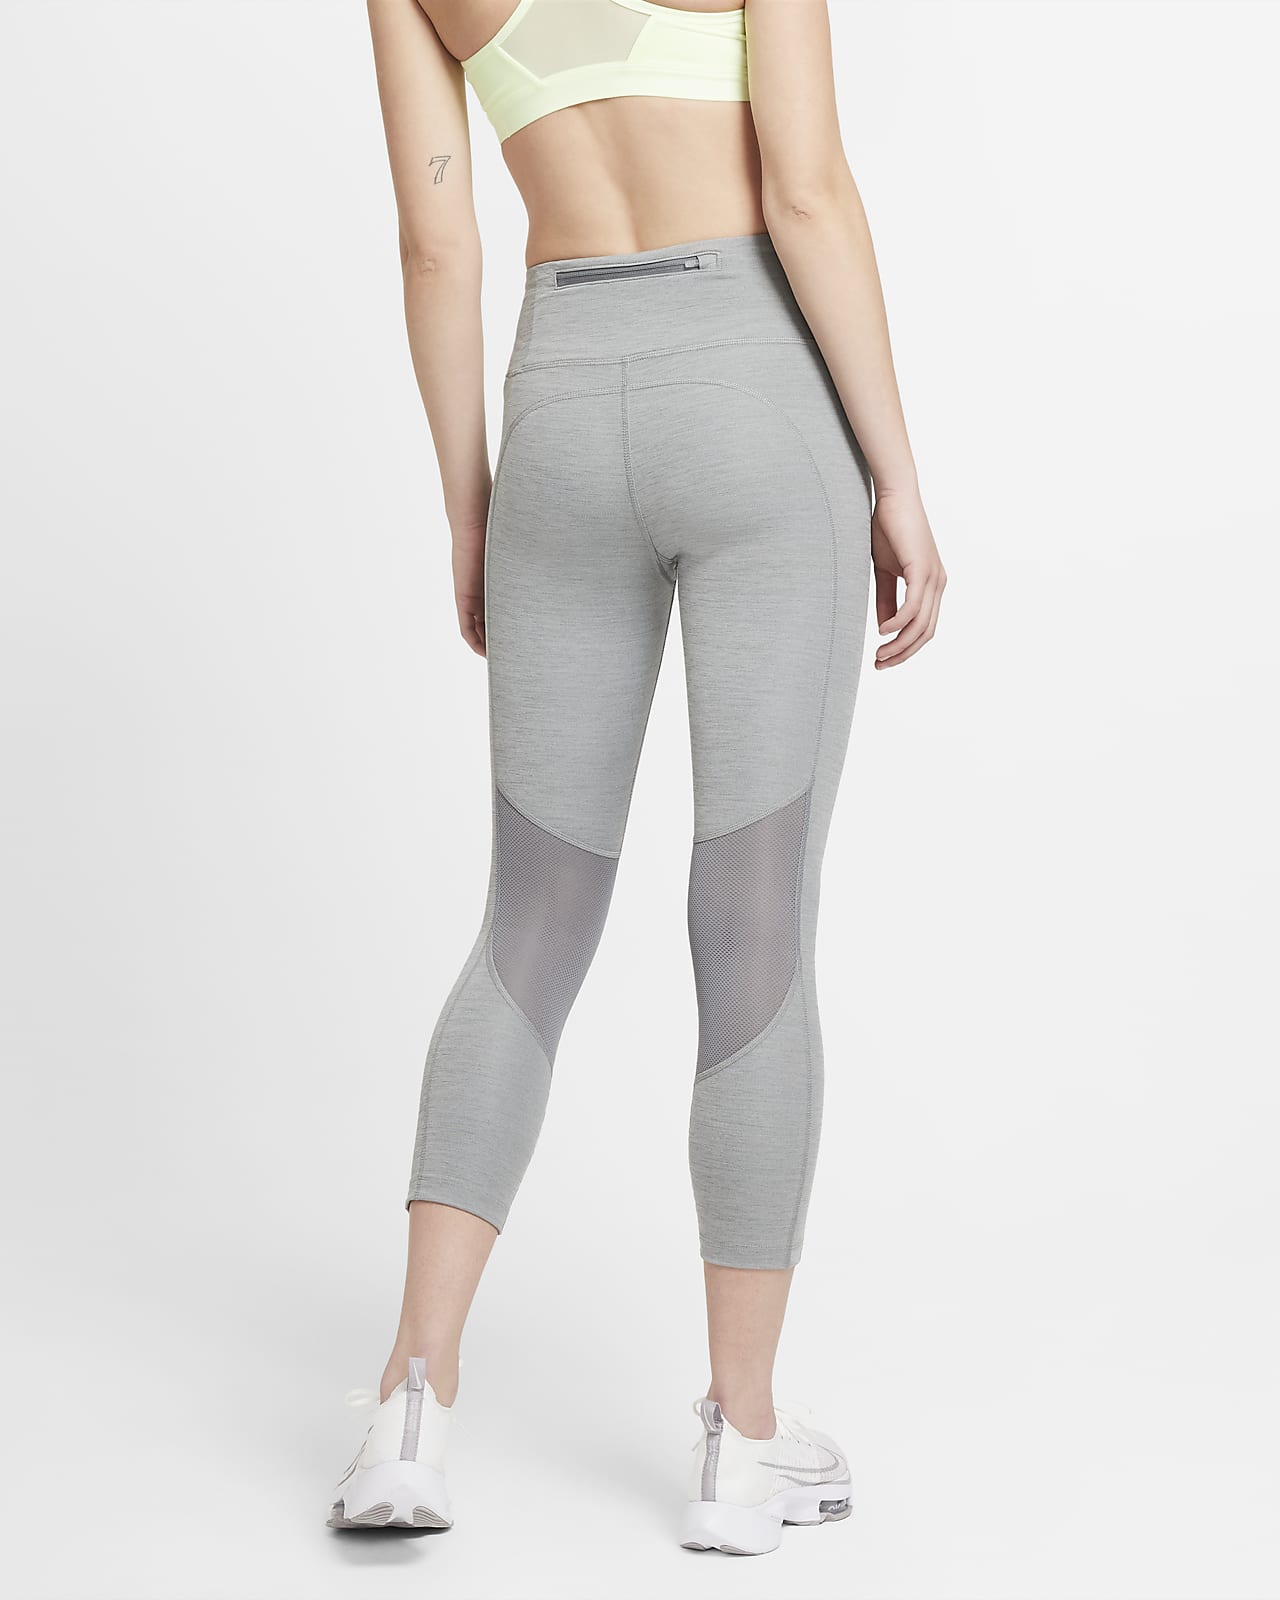 nike tights and crop top